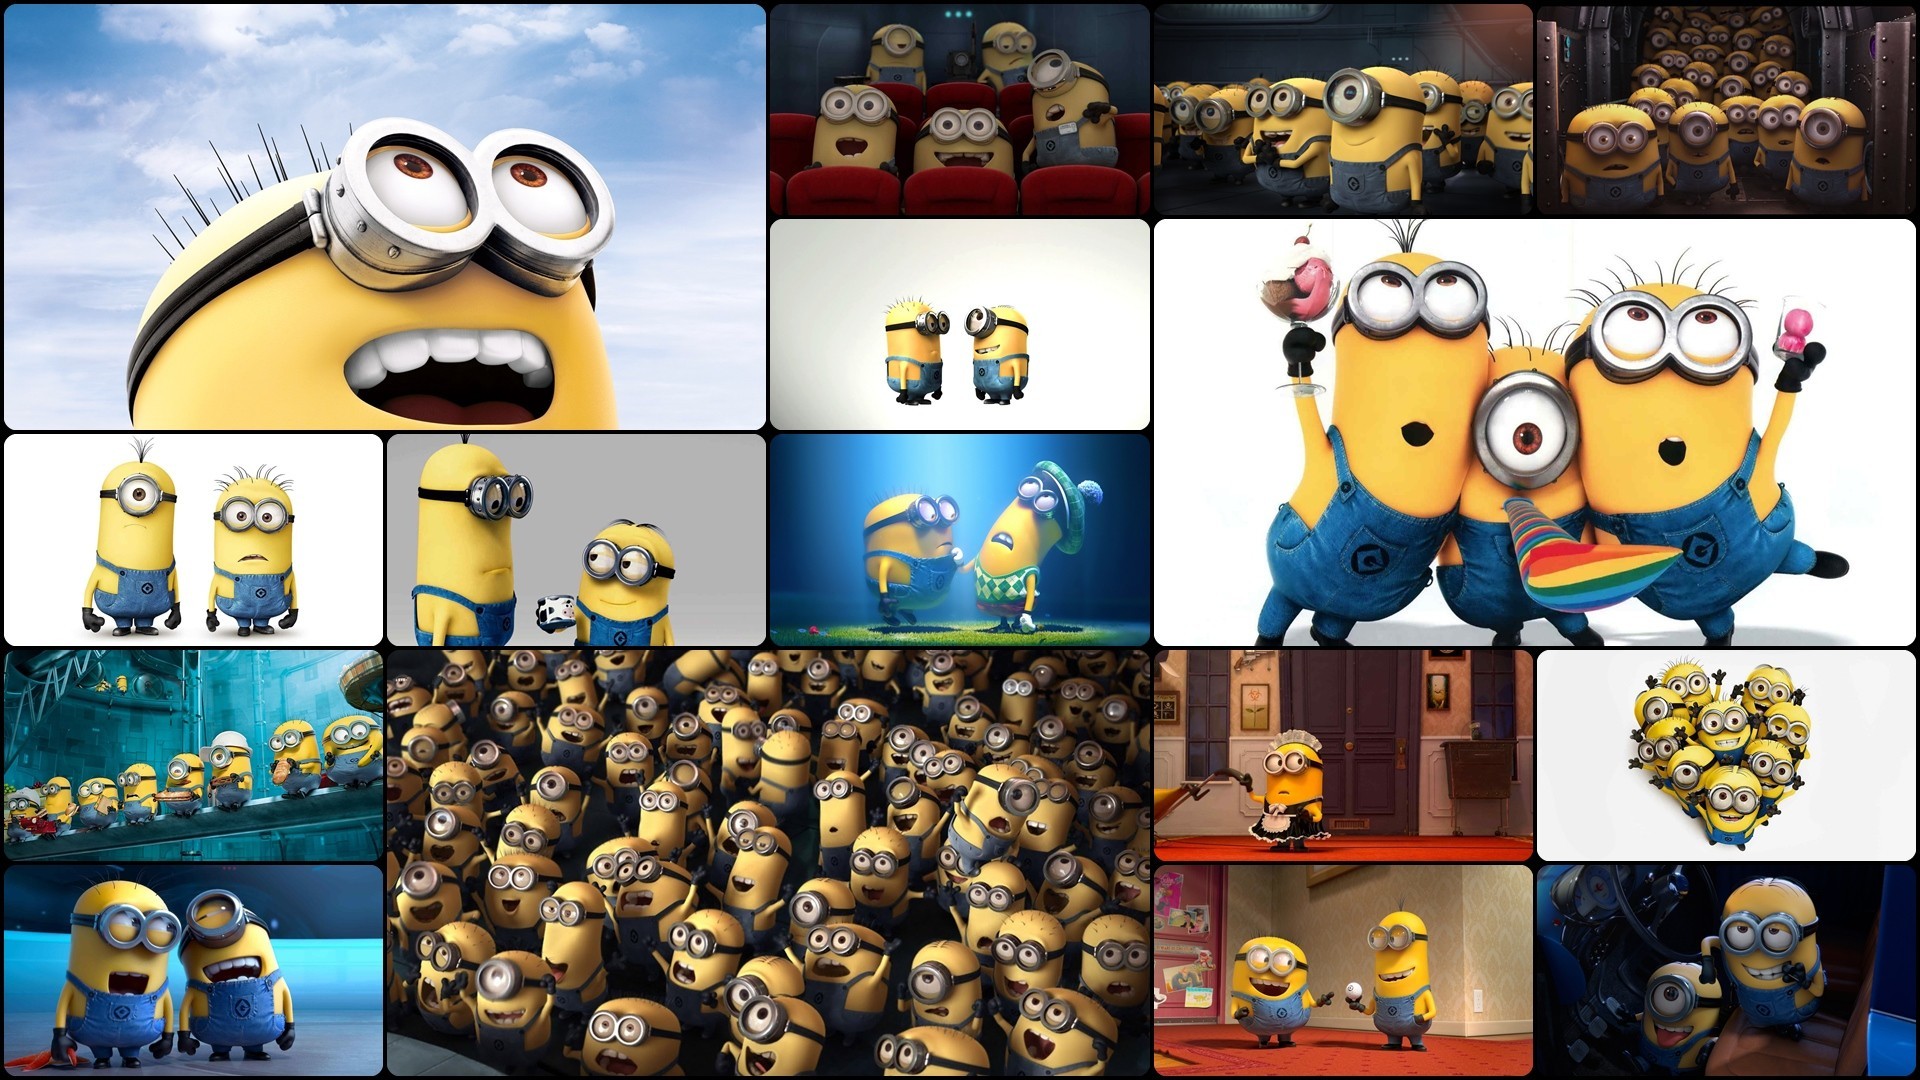 1920x1080 User blog:AwesomeOrange89/New Background | Despicable Me Wiki | FANDOM  powered by Wikia